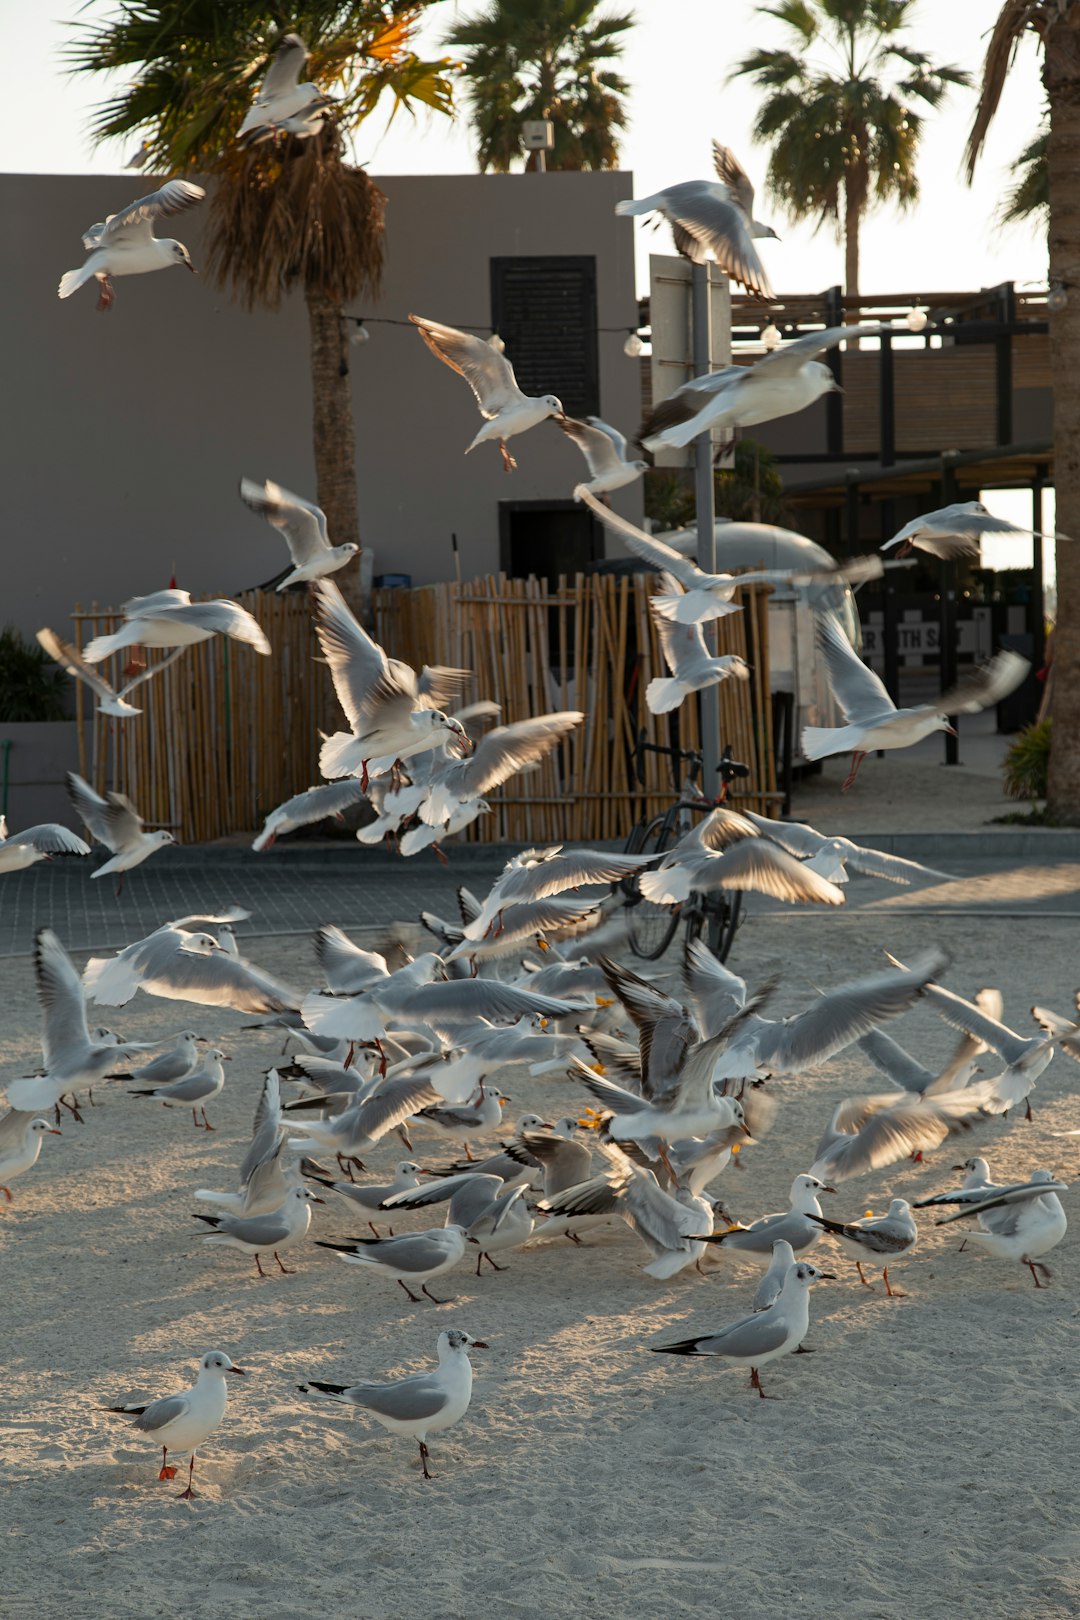 flock of white birds flying over the brown wooden house during daytime